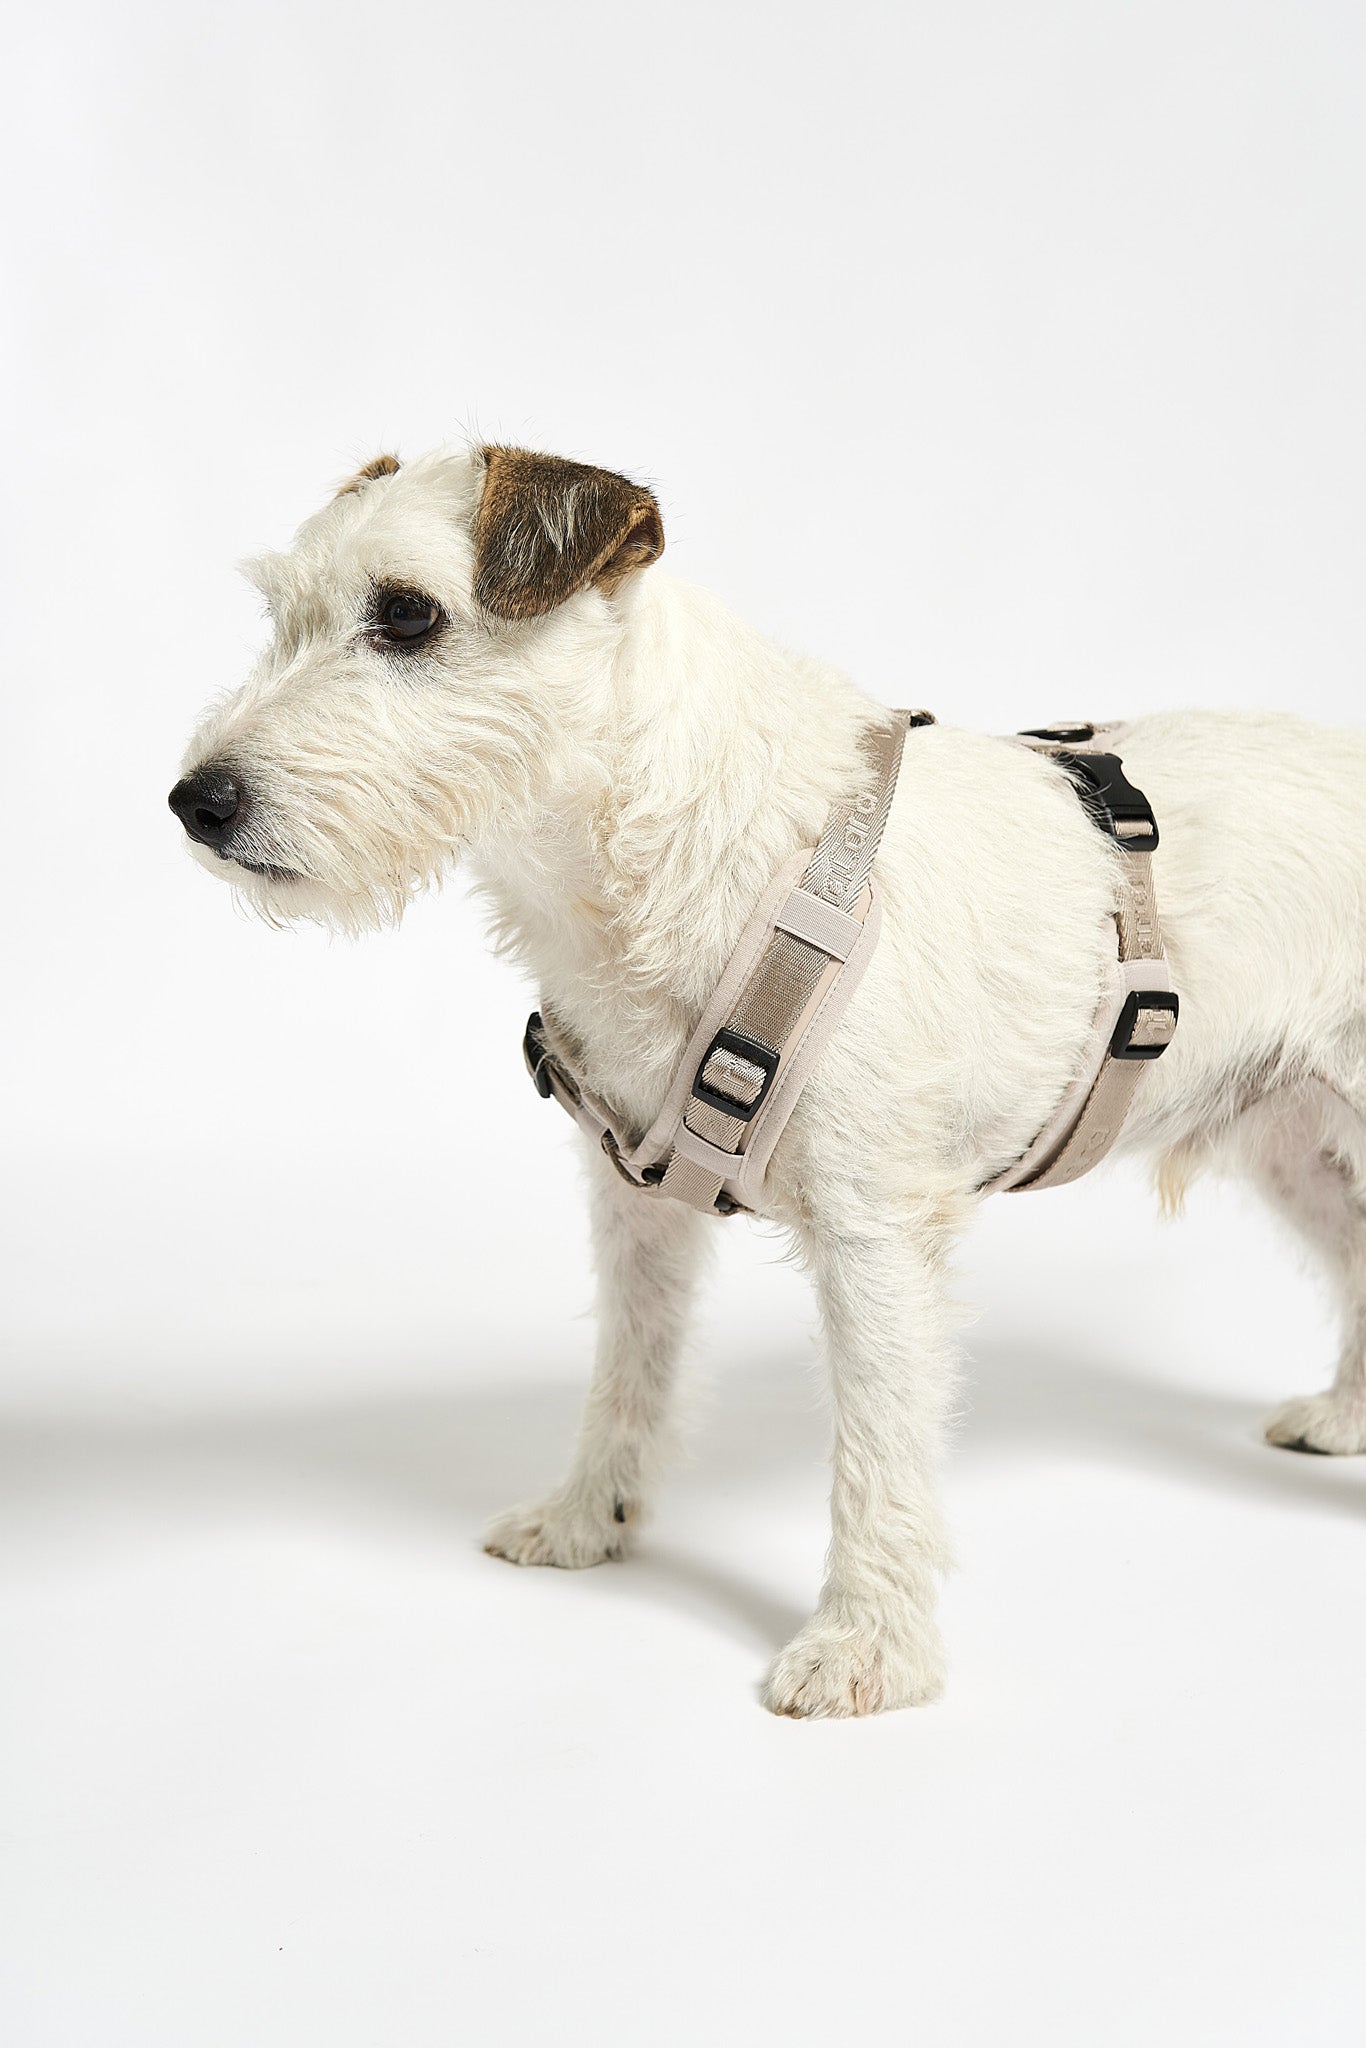  reduces strain on your dog's neck and back, promoting a healthier posture during walks